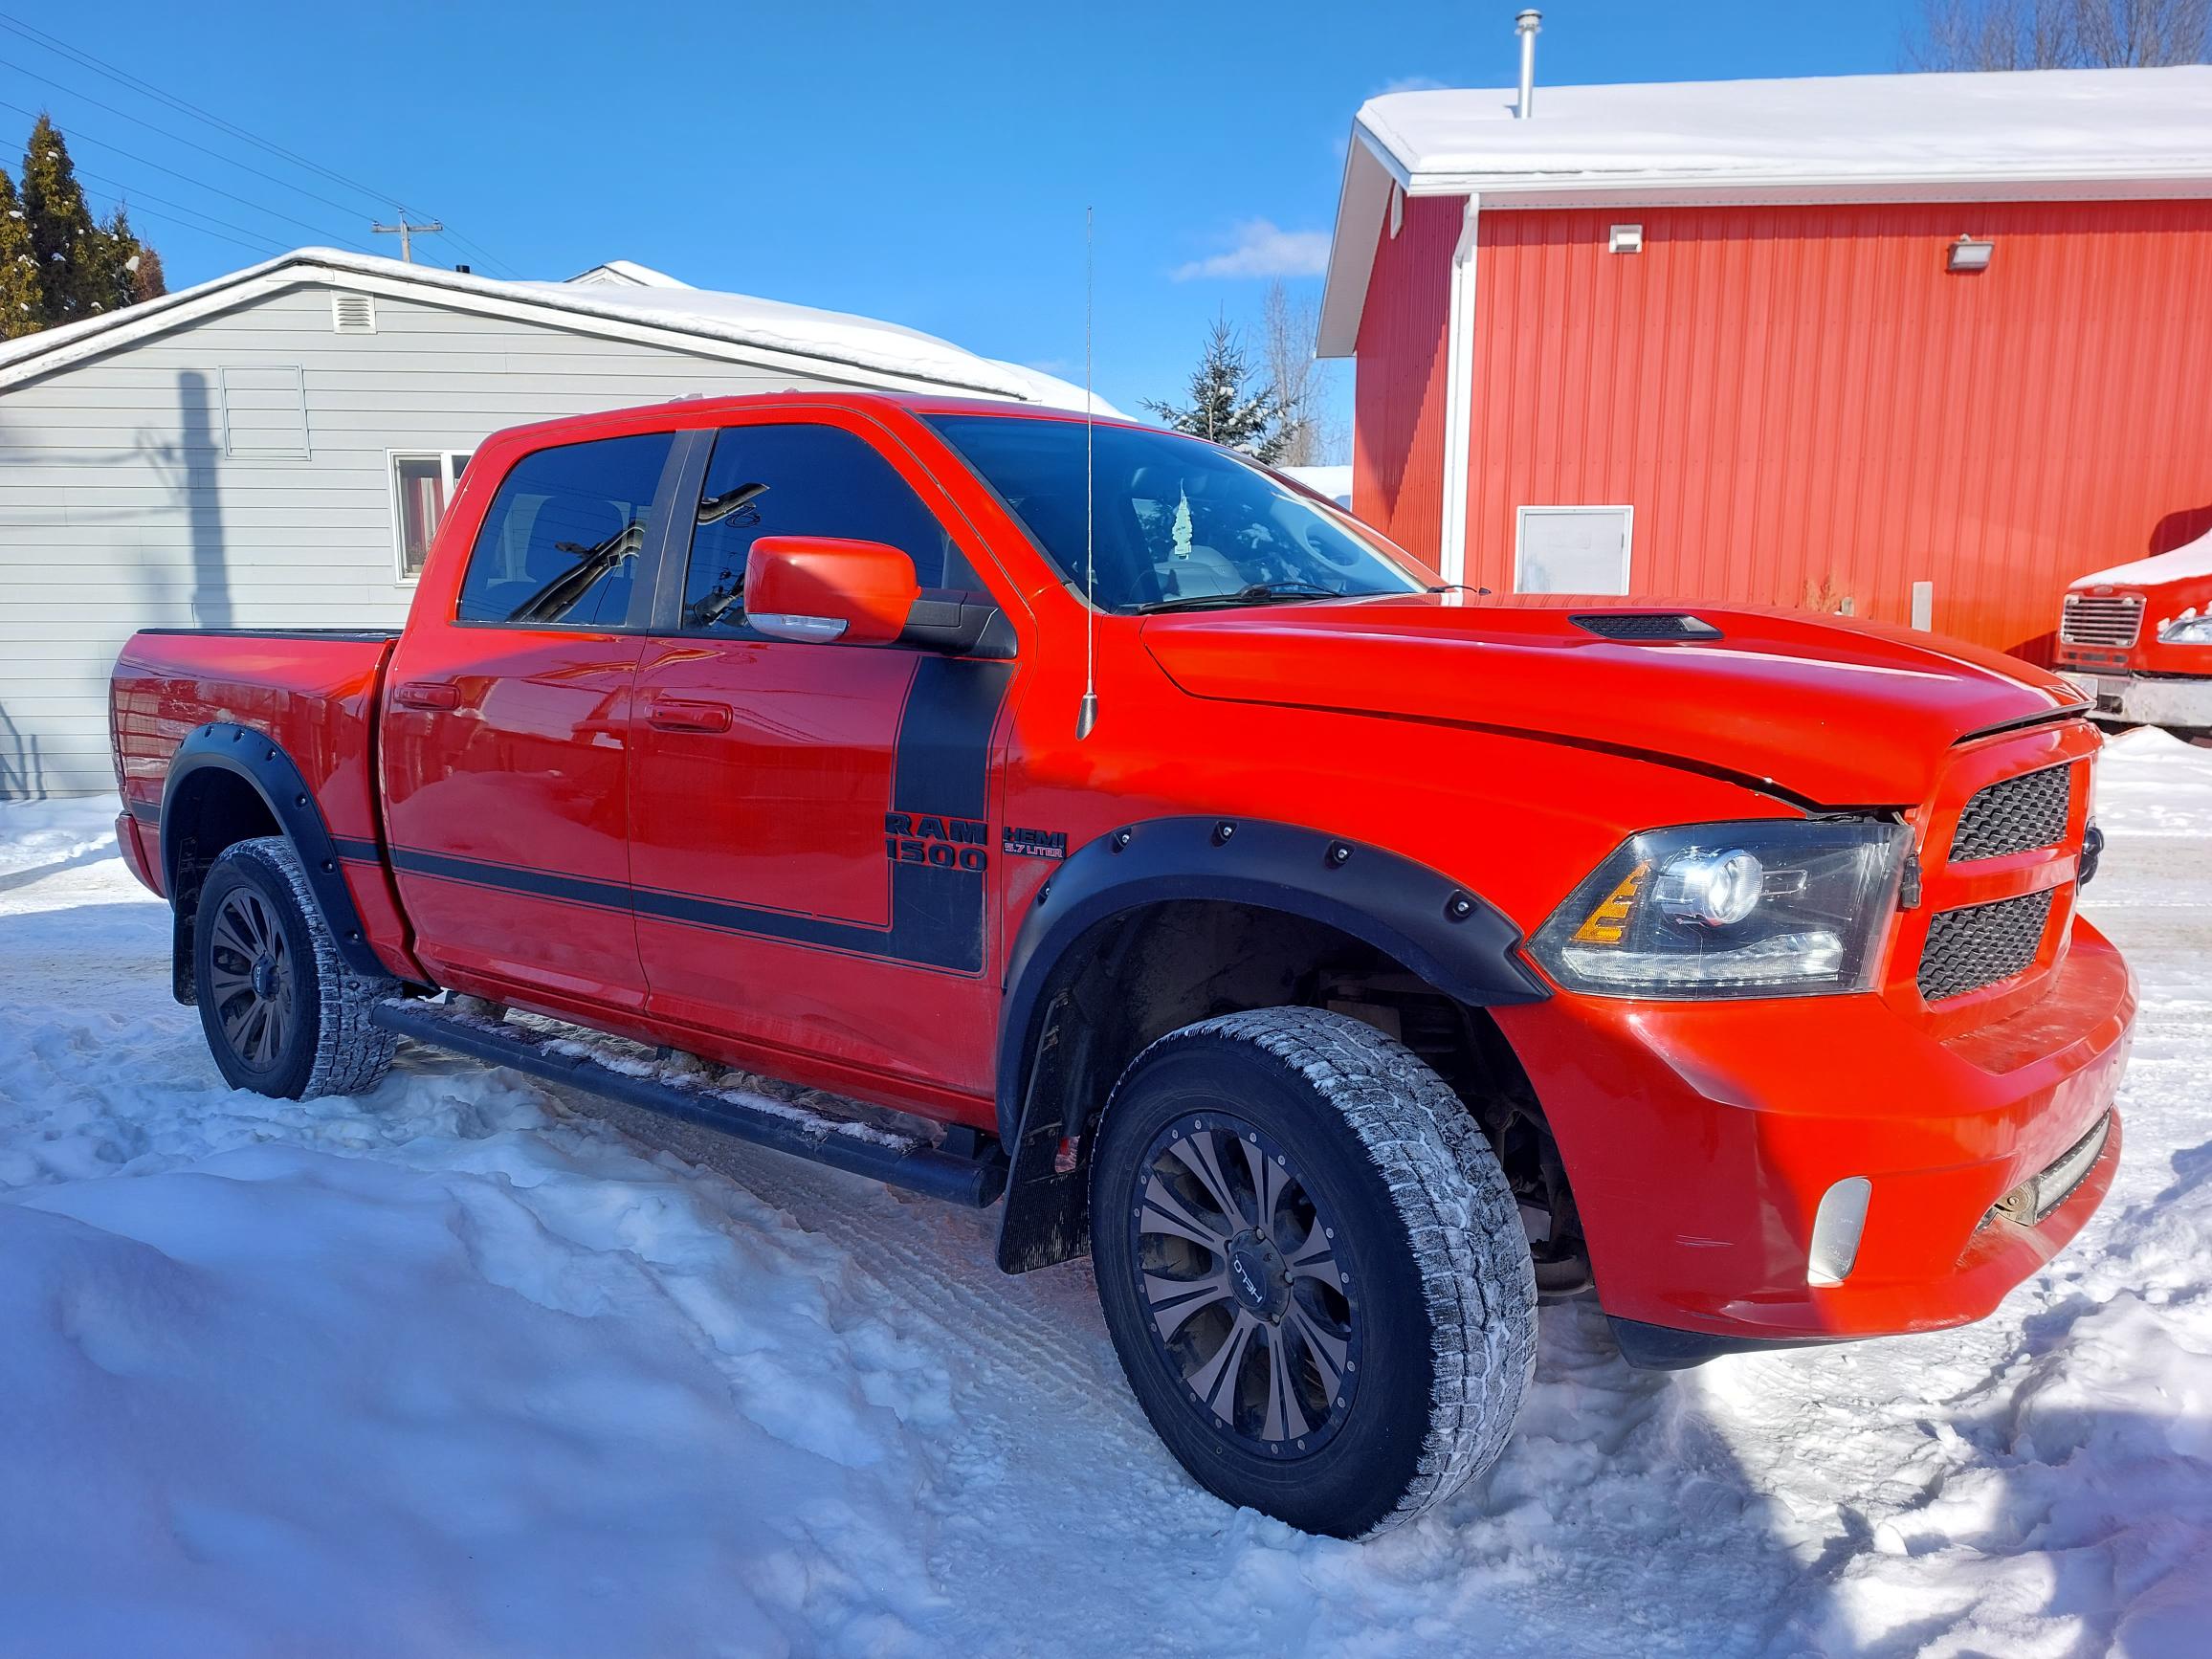 2016 Dodge Ram 1500 #B-PG-0741 Located in Prince George